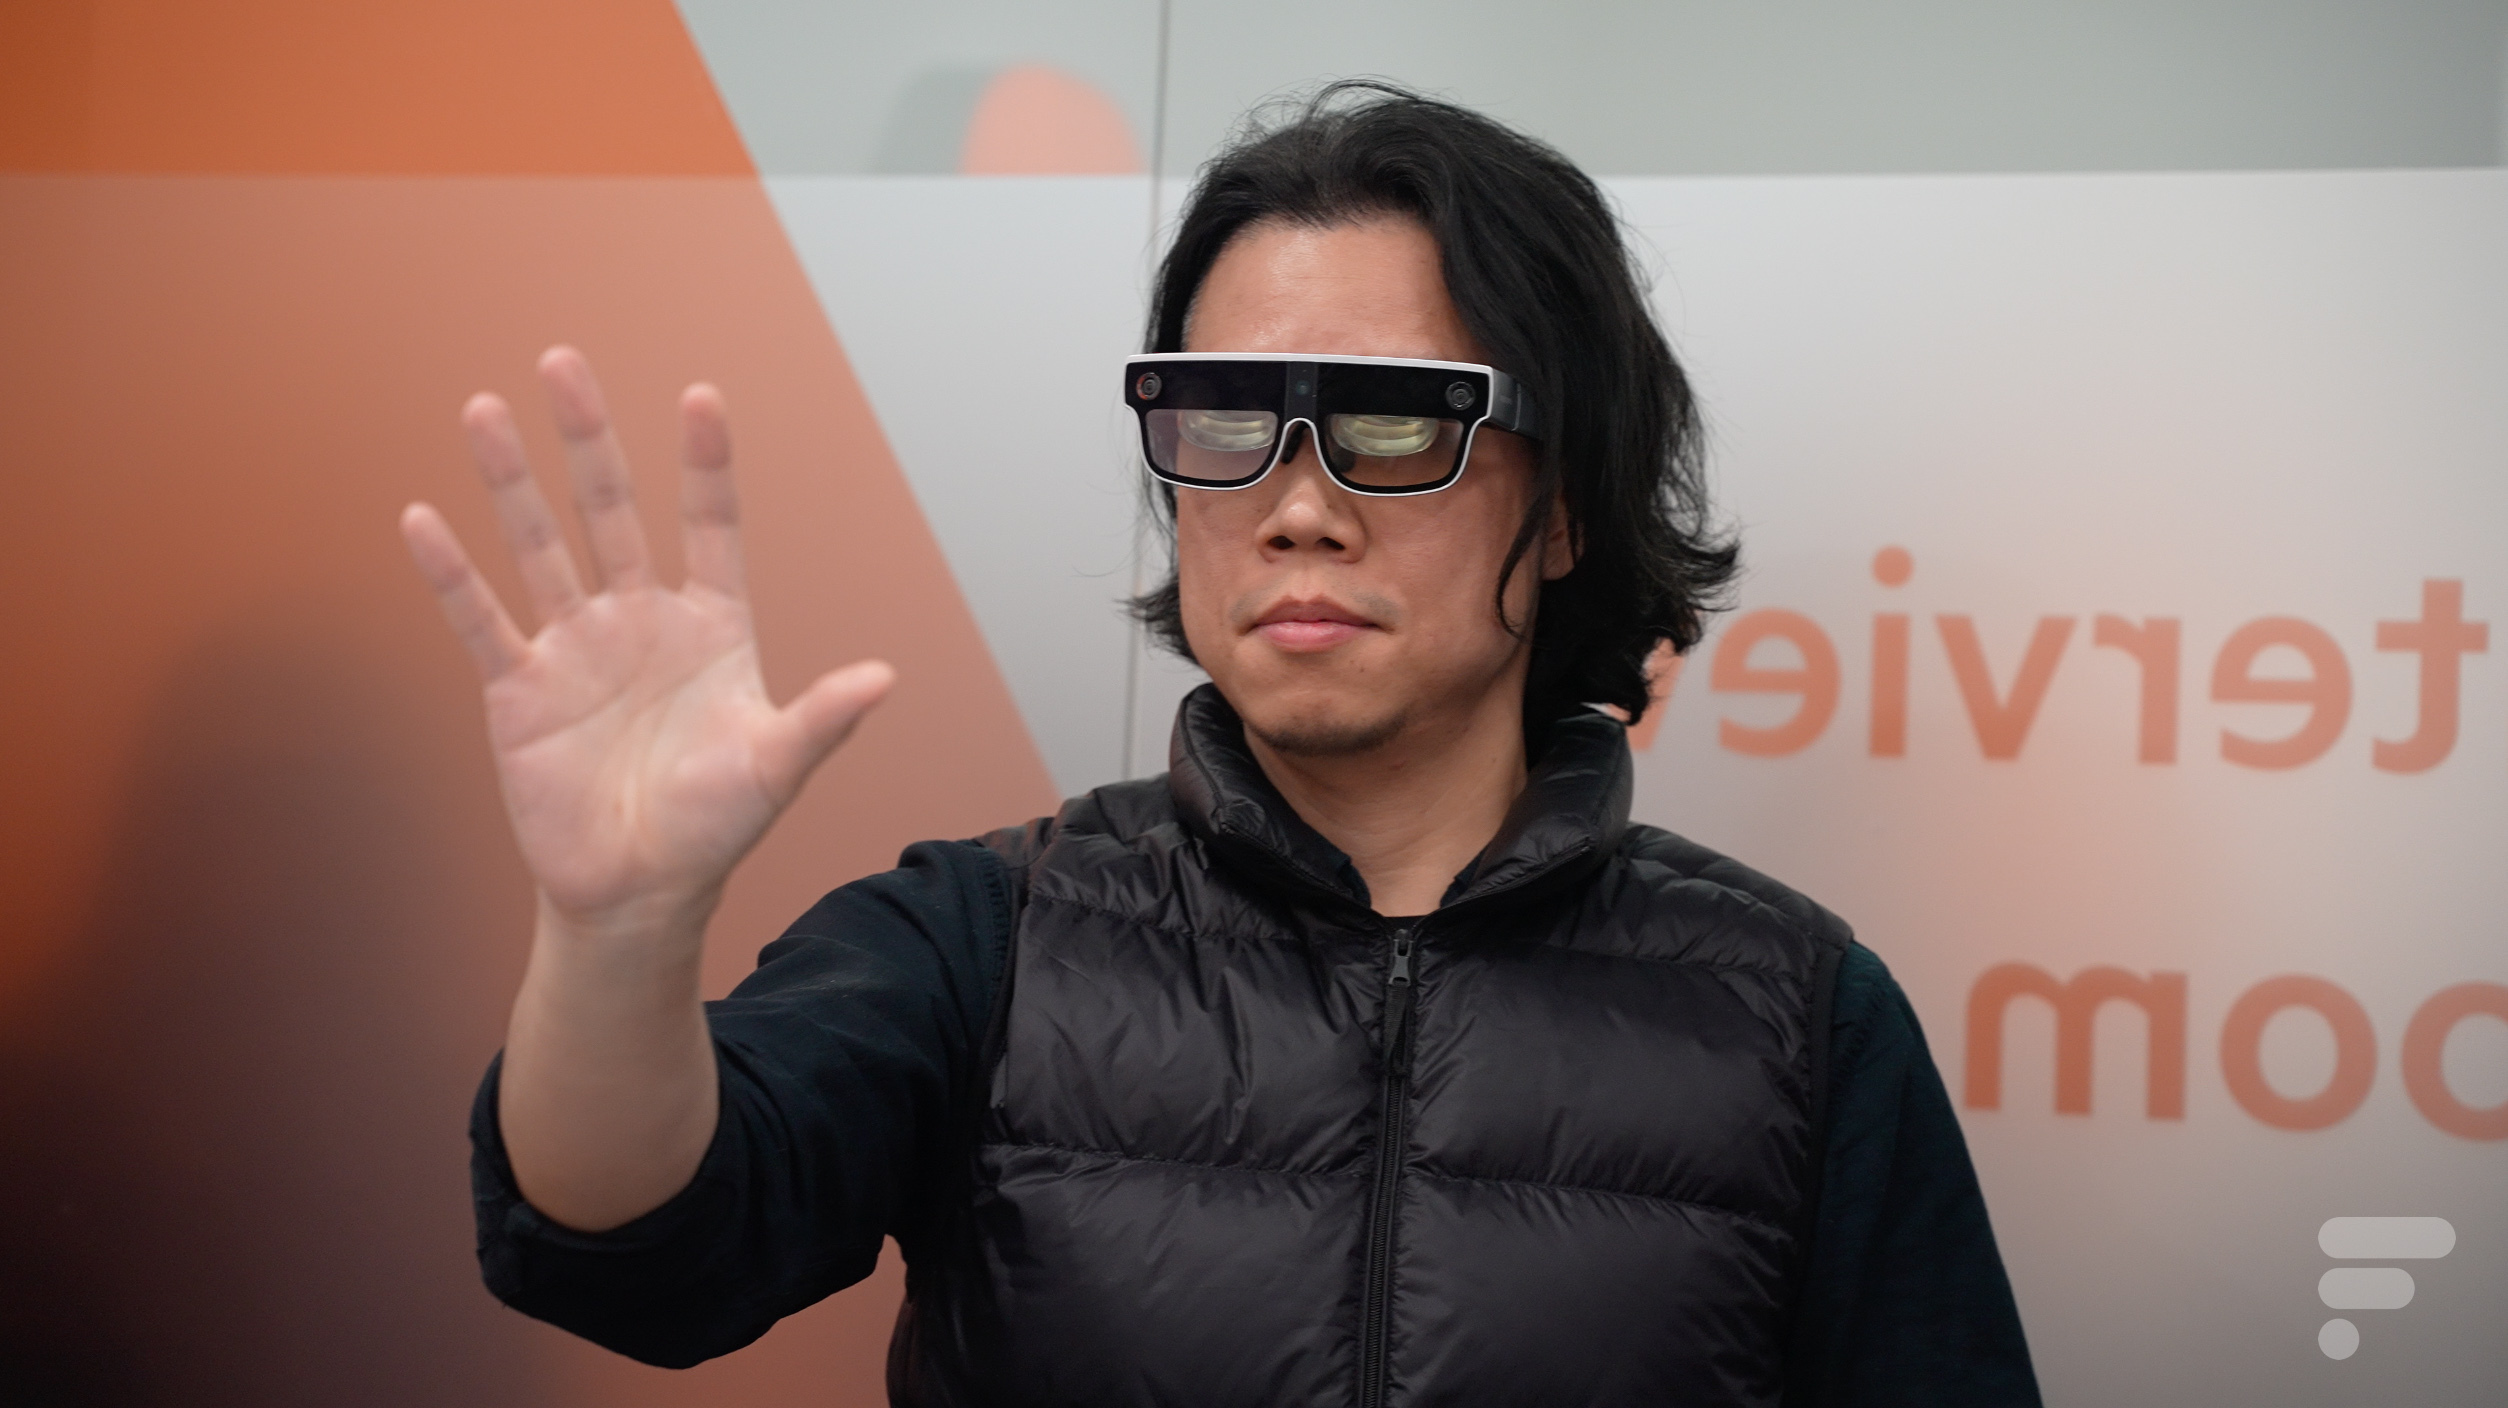 We’ve seen Xiaomi’s AR glasses and their technology promises to be stunning